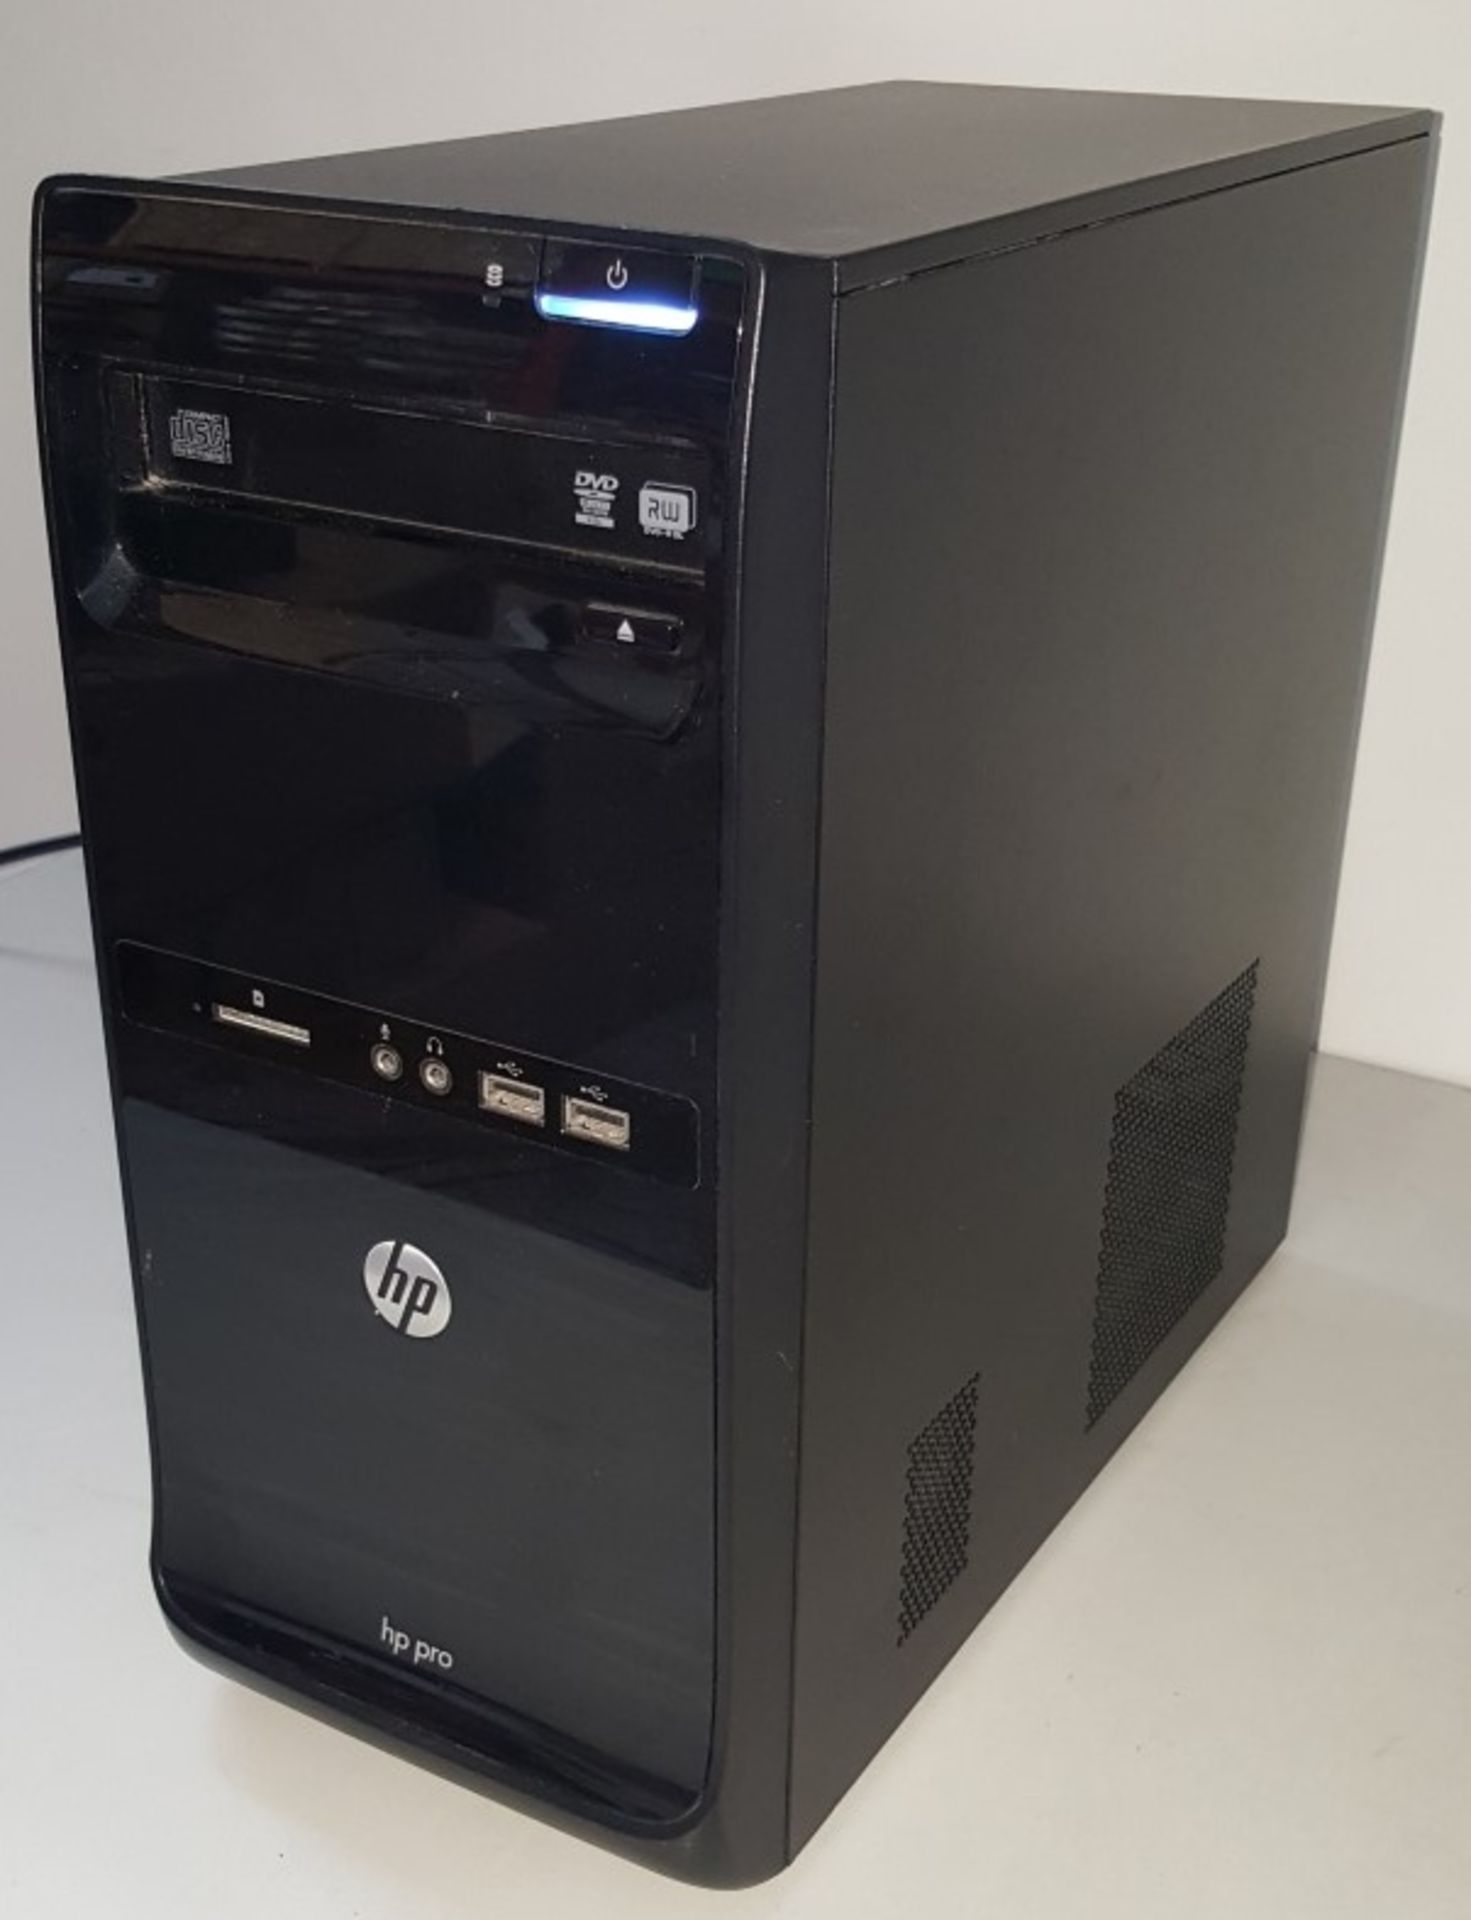 1 x HP Pro 3515 MT AMD A6-5400K 3.60GHz 4GB RAM Desktop PC - Ref BLT103 - Image 2 of 5